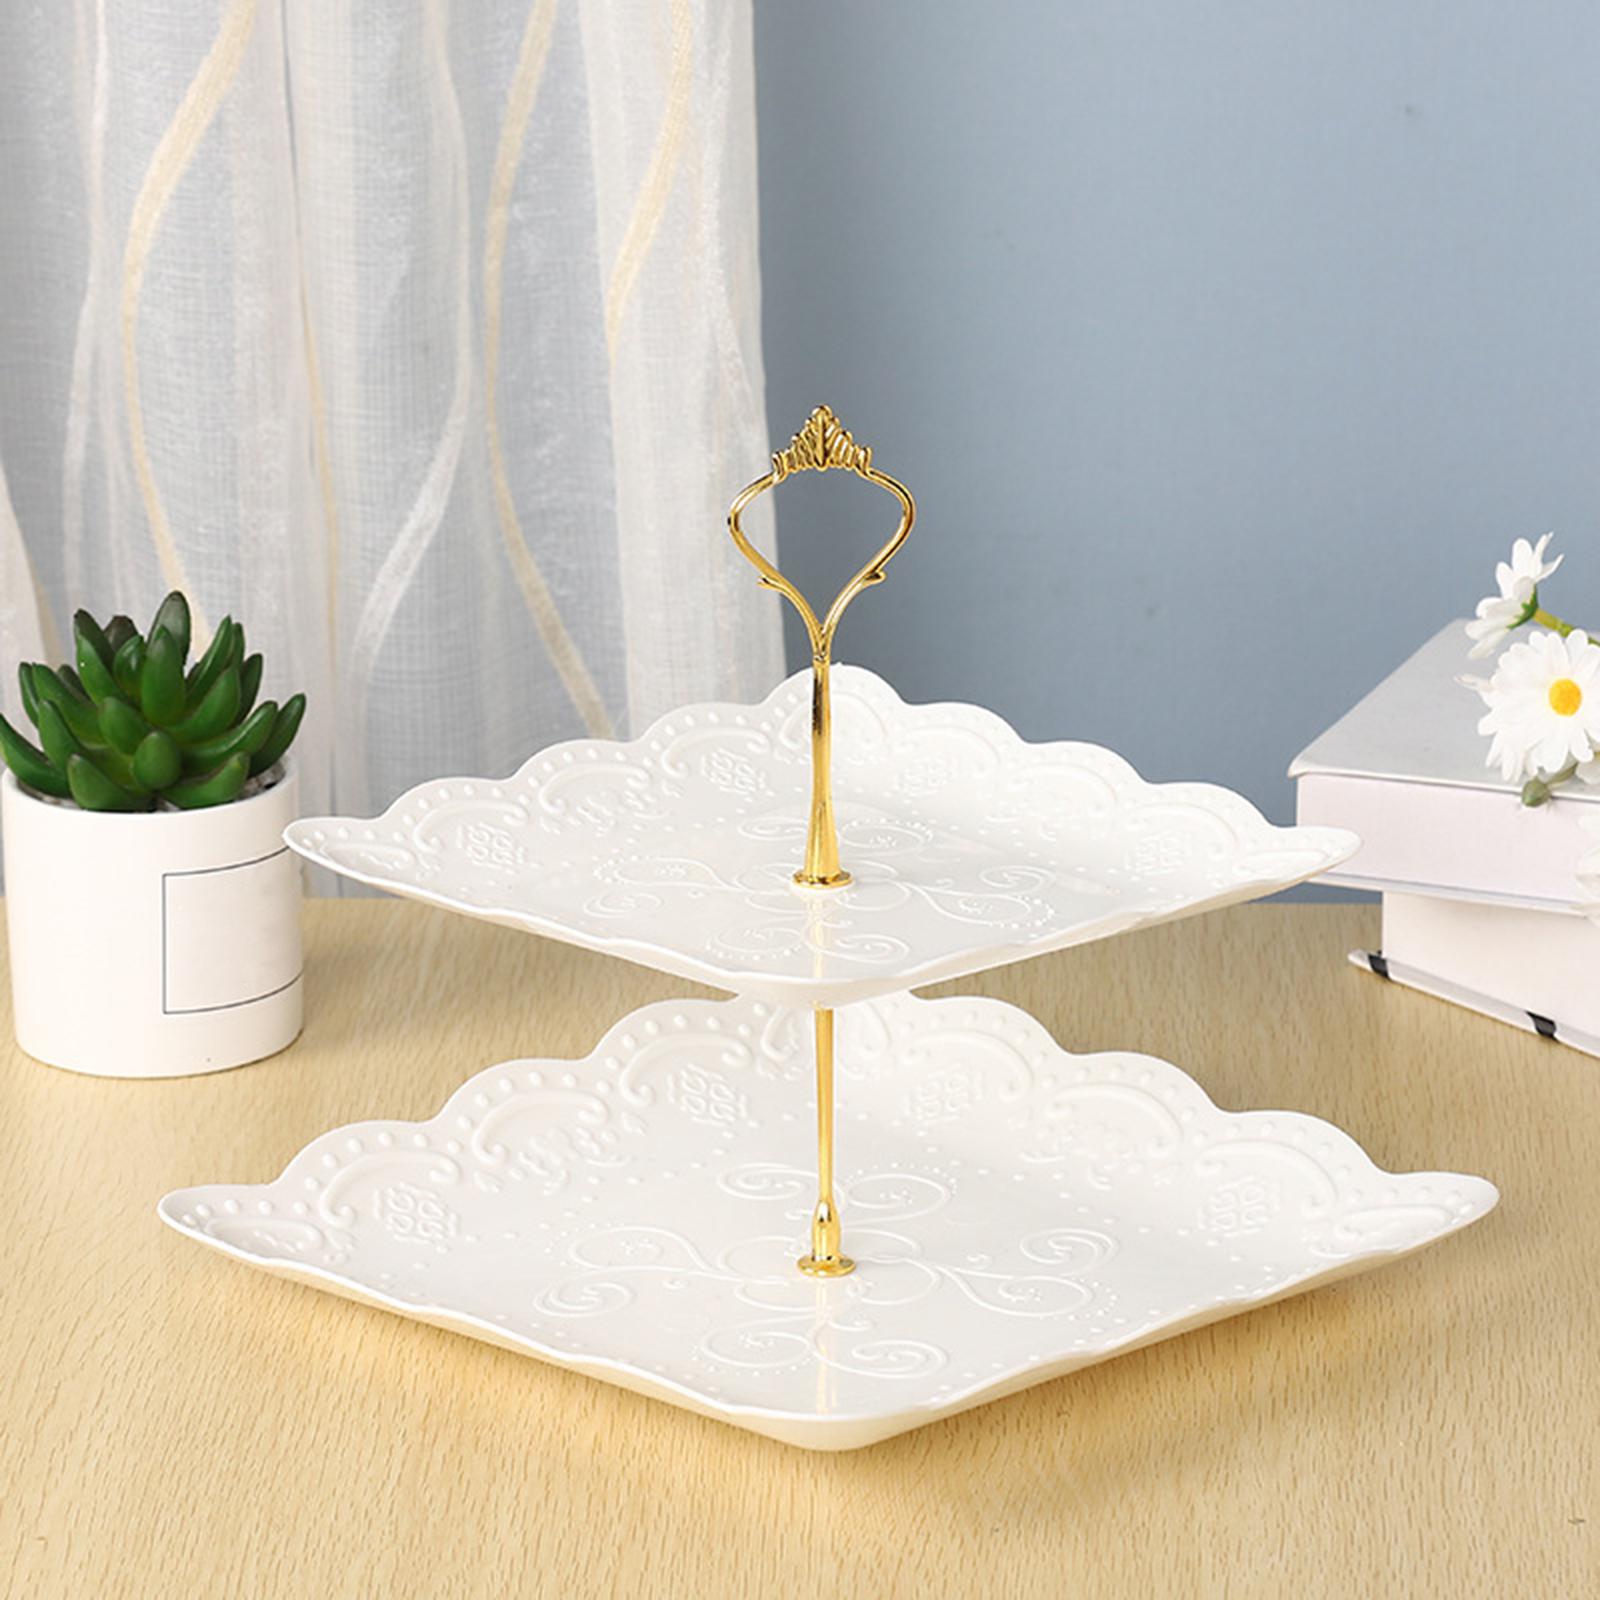 European Cake Plate Cupcake Stand Cake Holder Serving -Cake Stand- Fruit  Plate Serving Tray Dessert Plate Decorating Display Plate Square Golden 